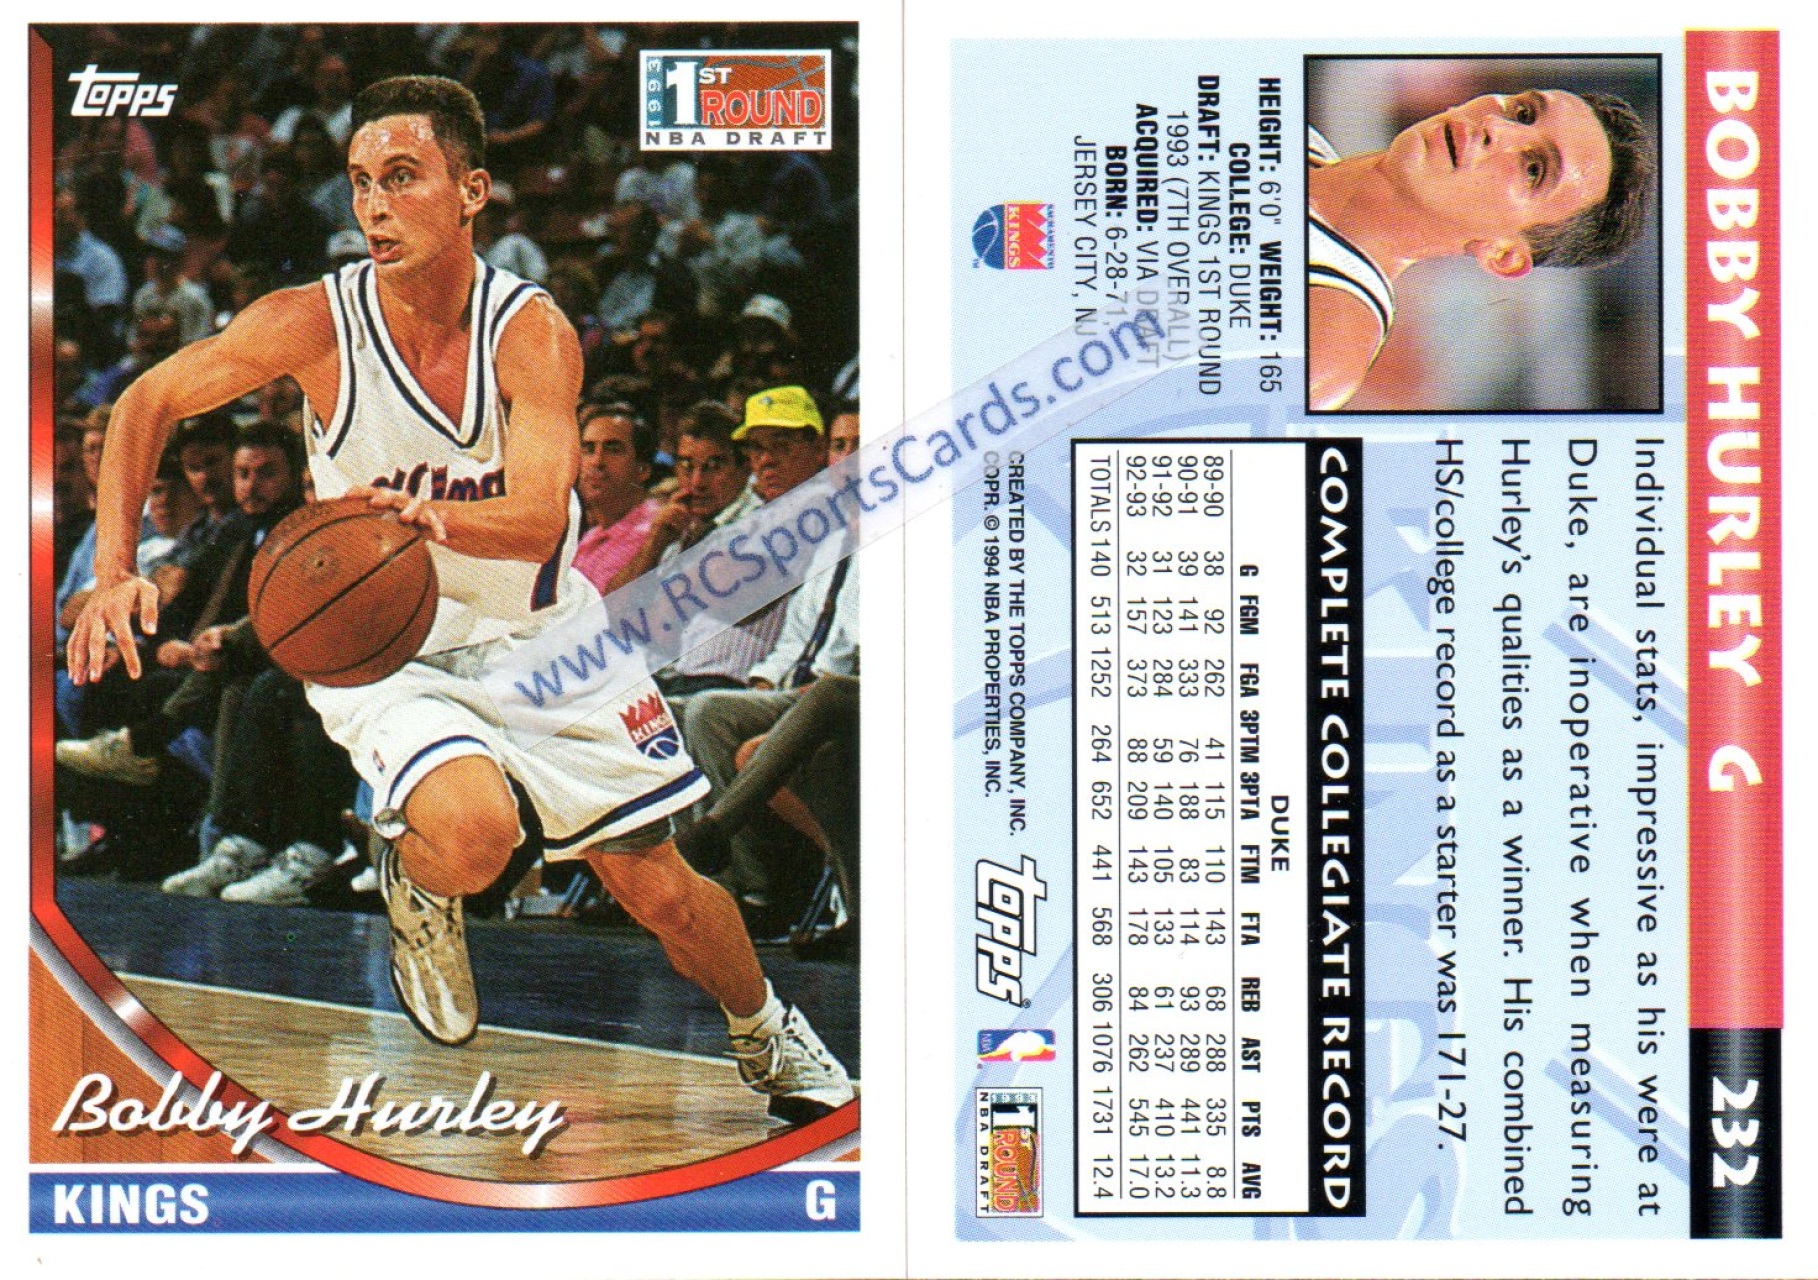  1993-94 Finest Basketball #57 Spud Webb Sacramento Kings  Premiere Edition of Finest. Official NBA Trading Card From The Topps  Company : Collectibles & Fine Art